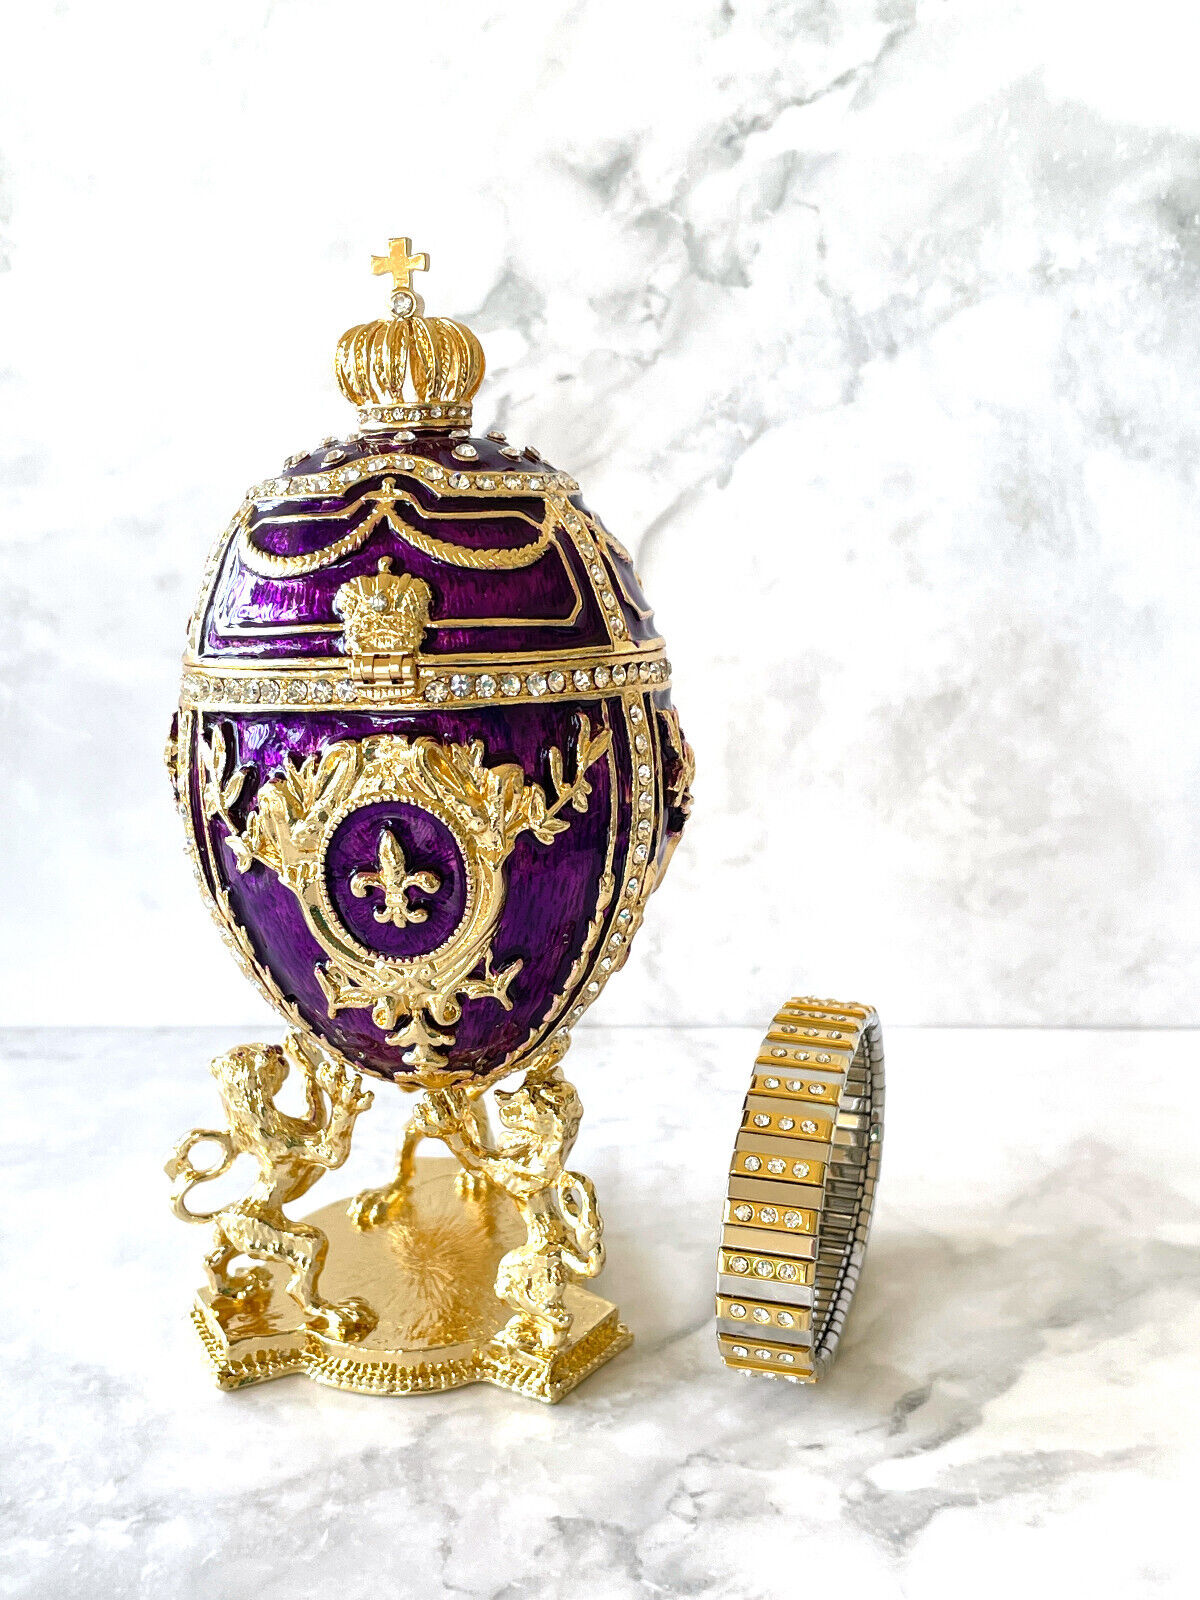 Pierre Lorren Faberge Imperial Collection Faberge Egg Trinket Fabergé egg GOLD